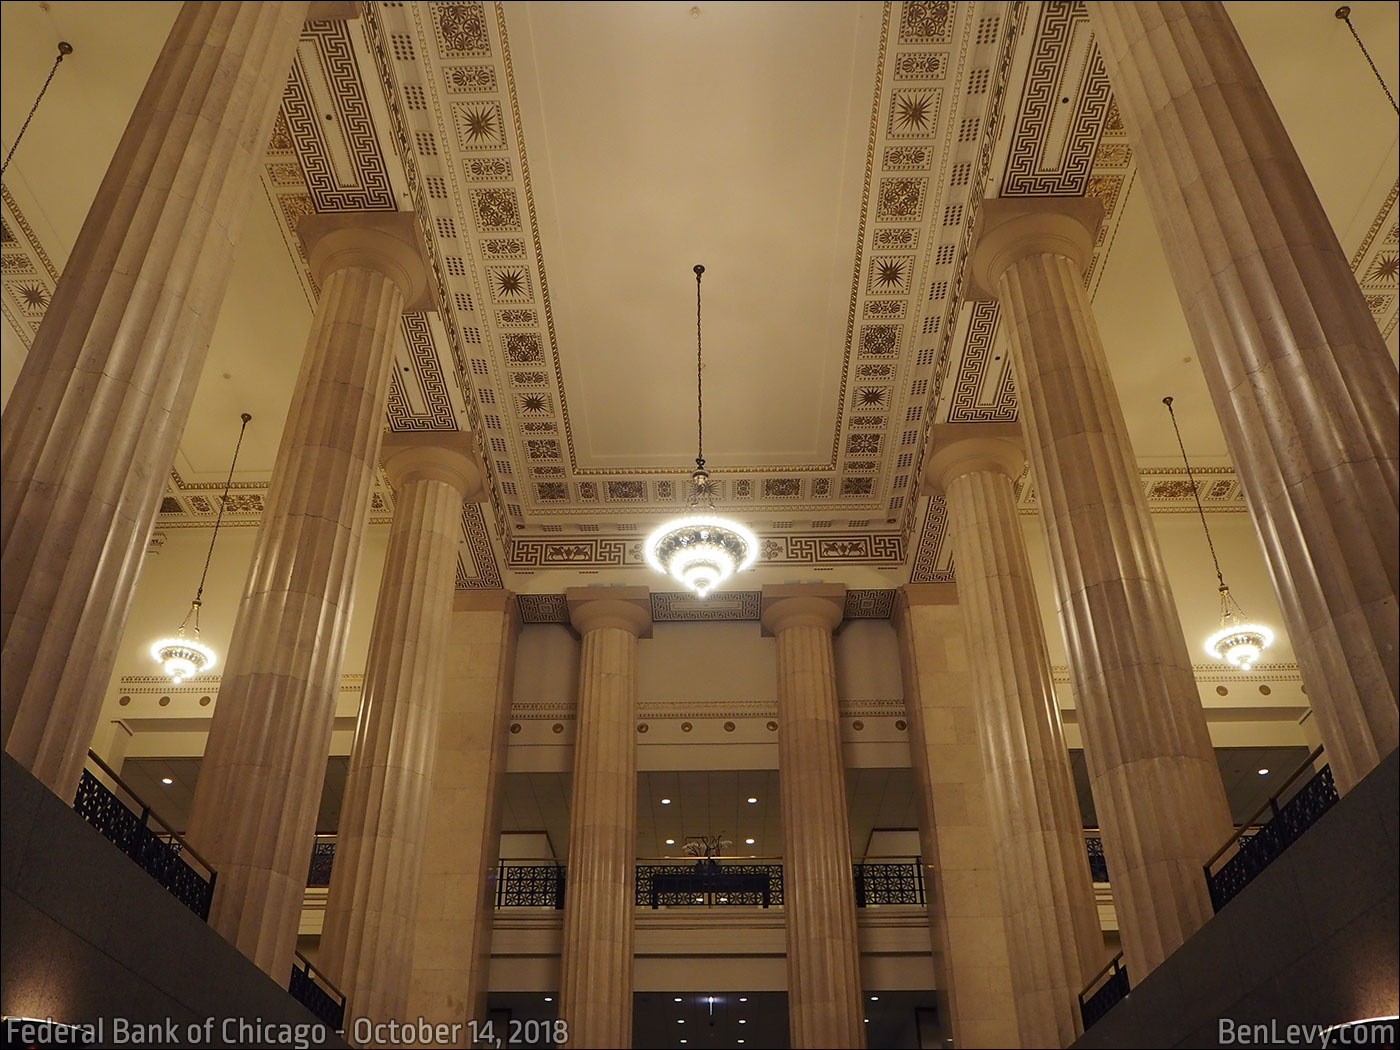 The Great Hall at the Federal Reserve Bank of Chicago